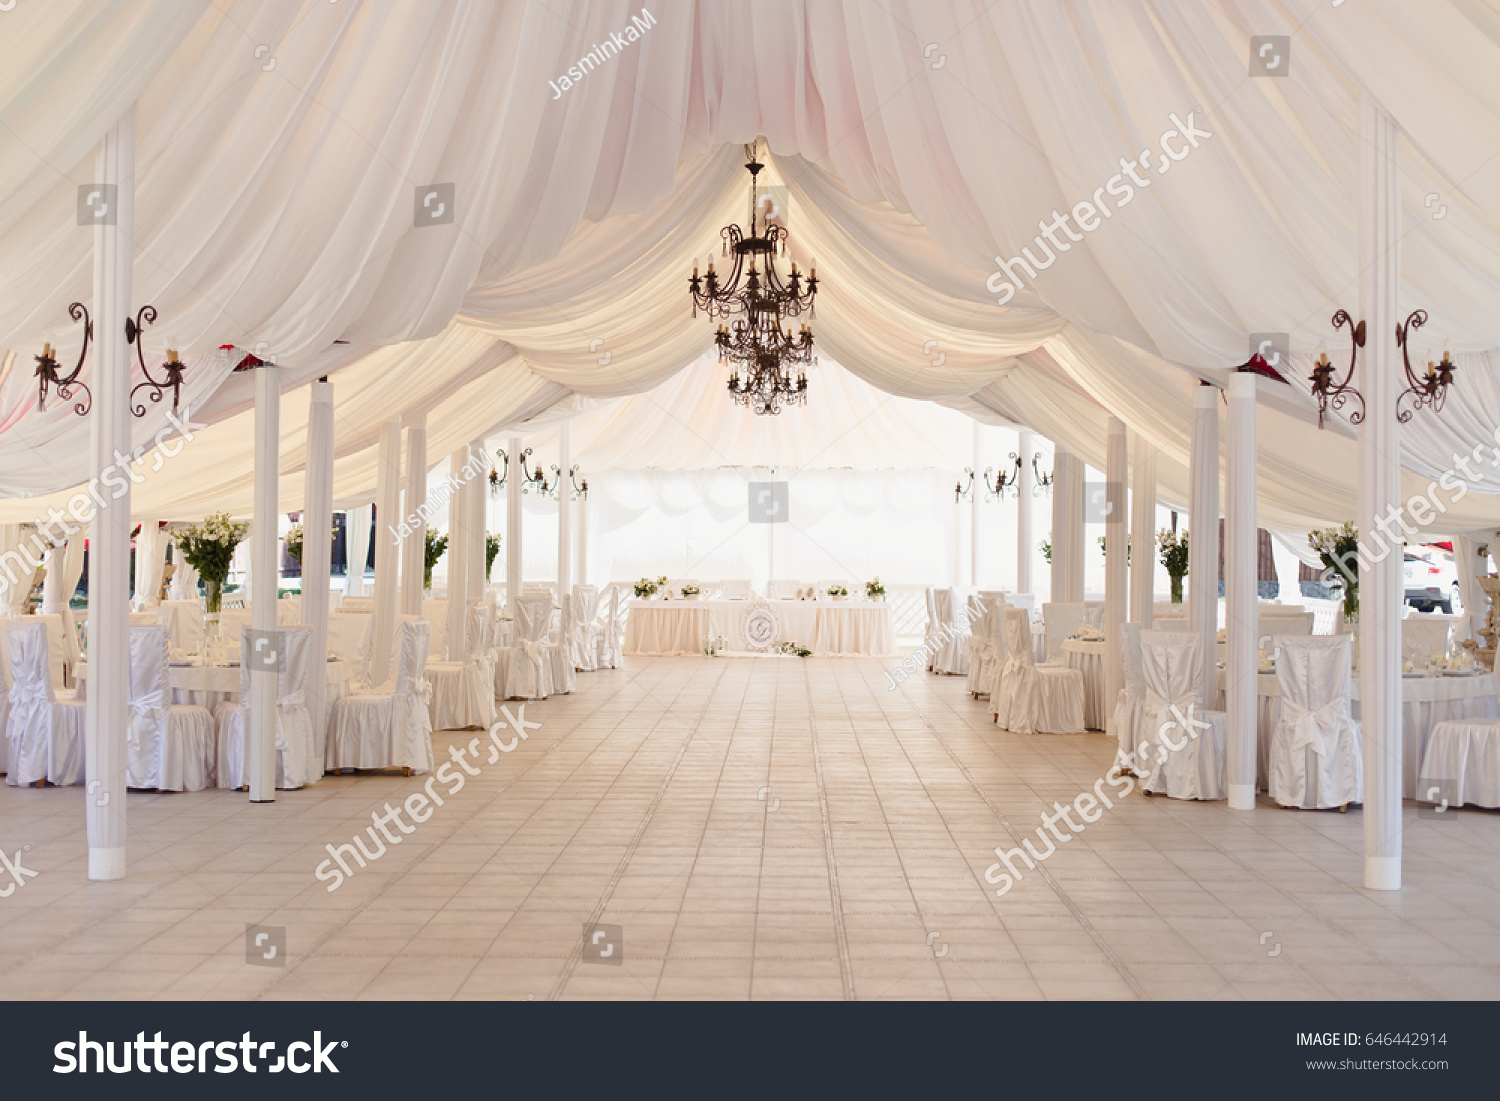 Marquee for the celebration of the wedding. Beautiful white interior with white draperies #646442914